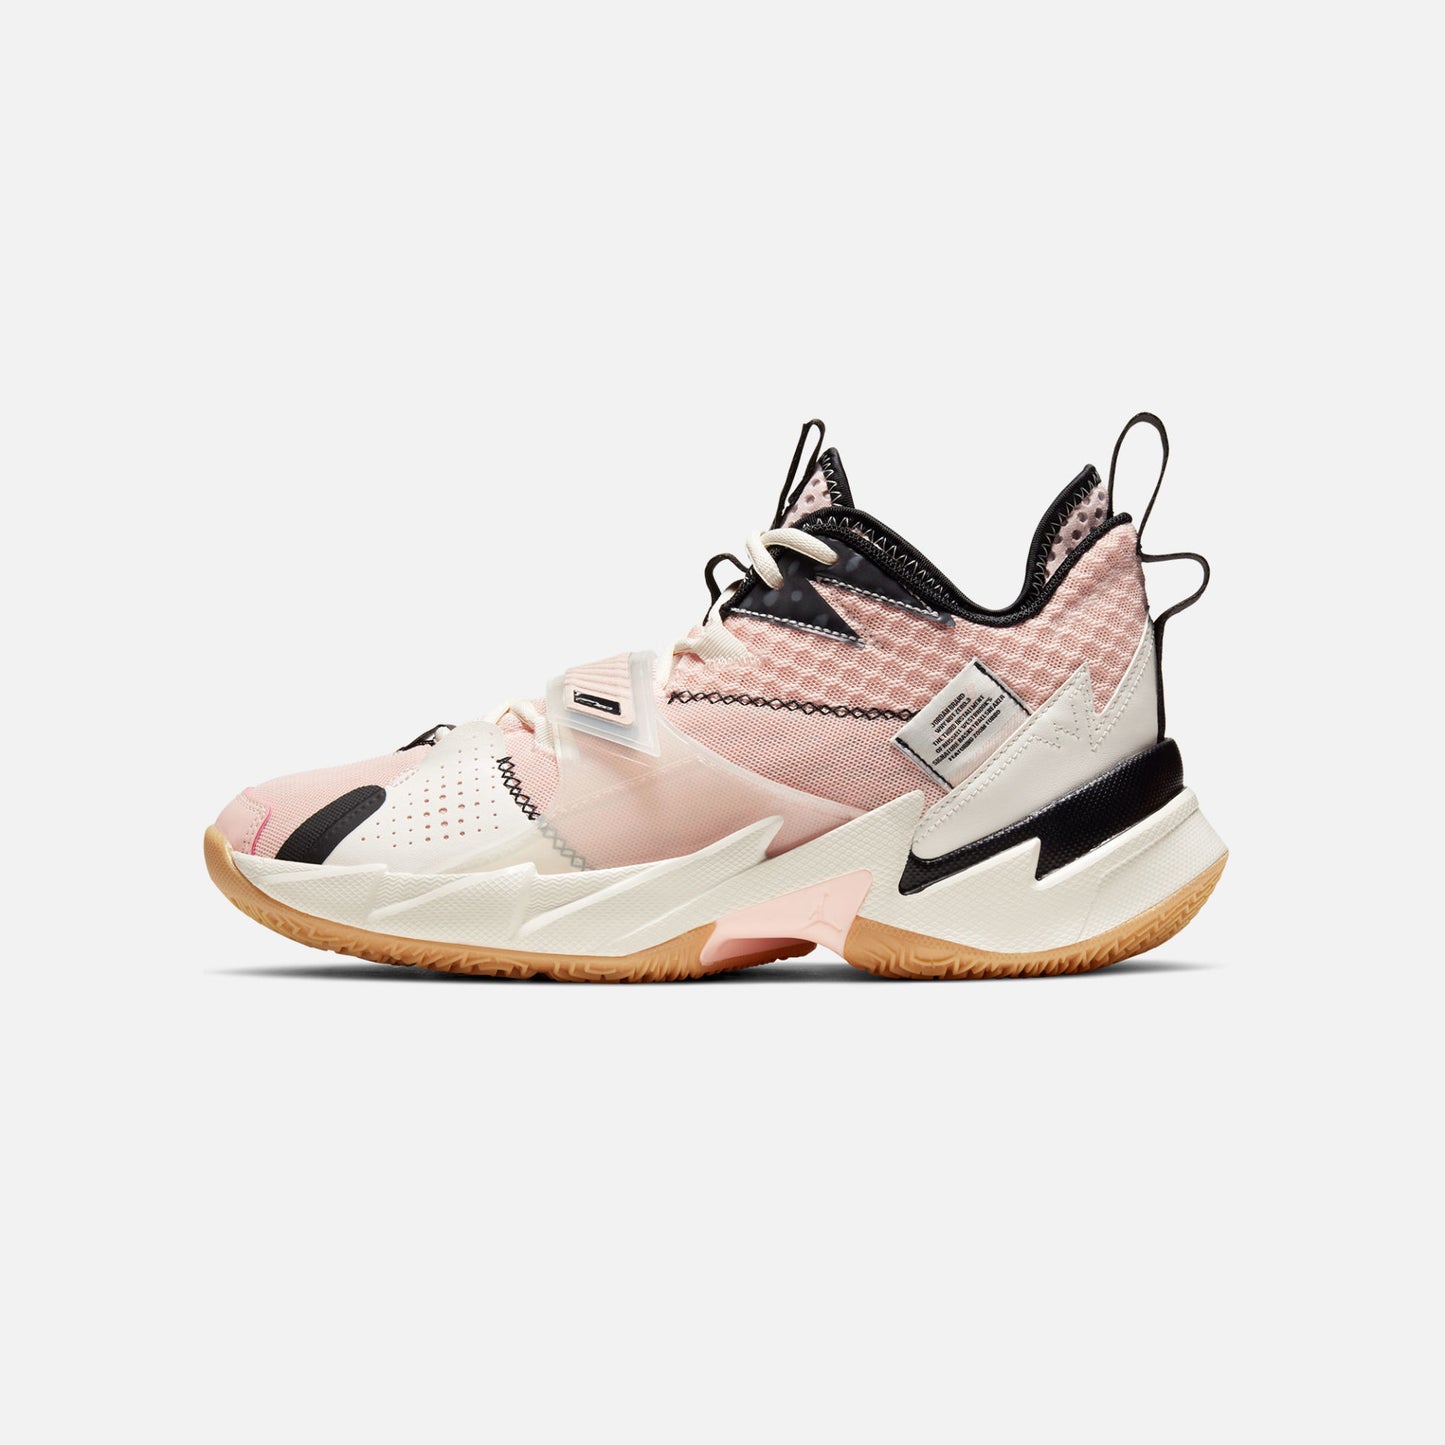 JORDAN "WHY NOT?" ZER0.3 PF WASHED CORAL